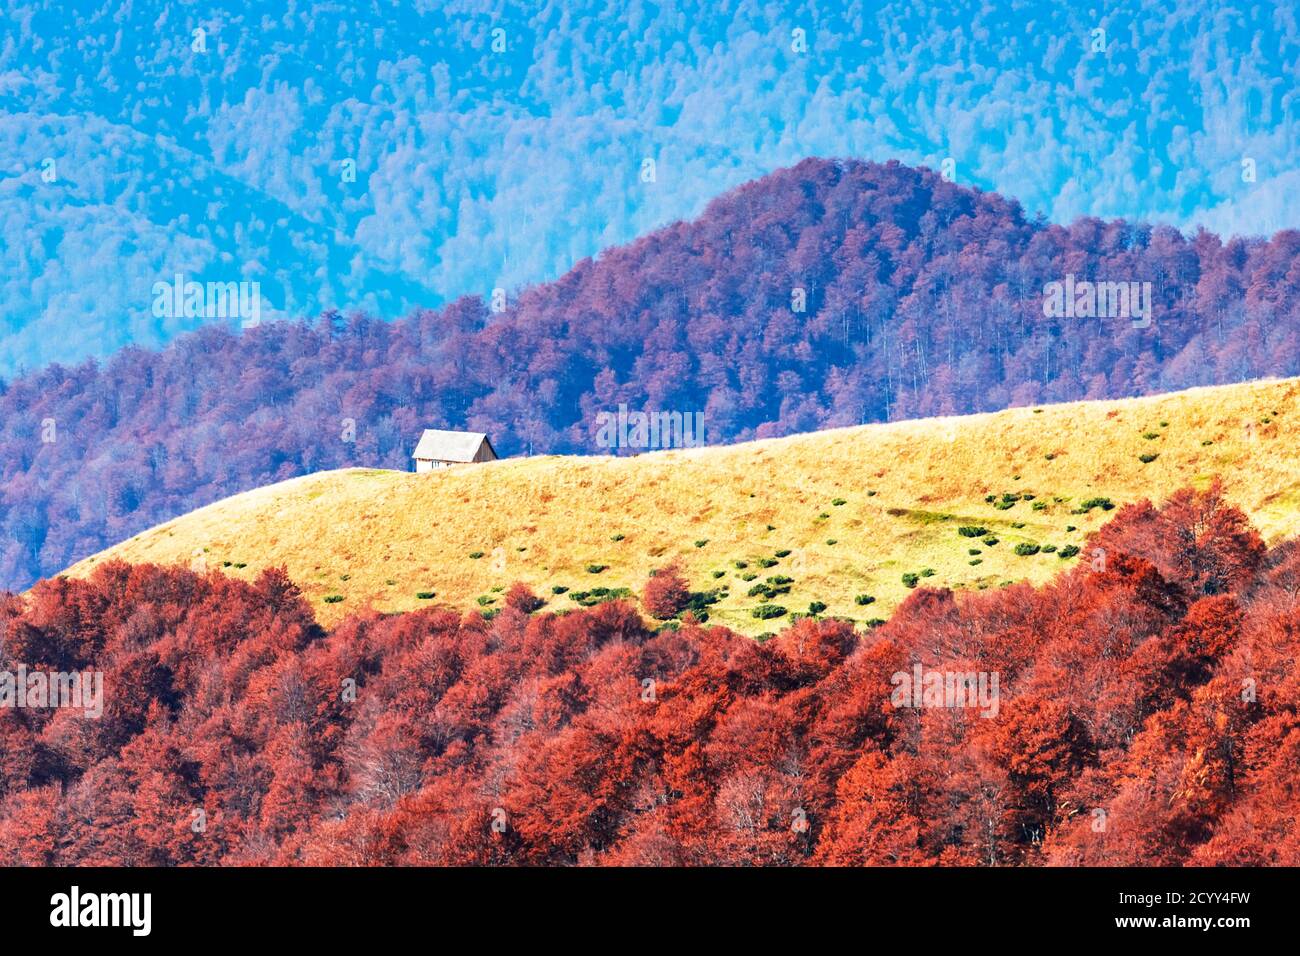 Picturesque autumn meadow with wooden house and red beech trees in the Carpathian mountains, Ukraine. Landscape photography Stock Photo